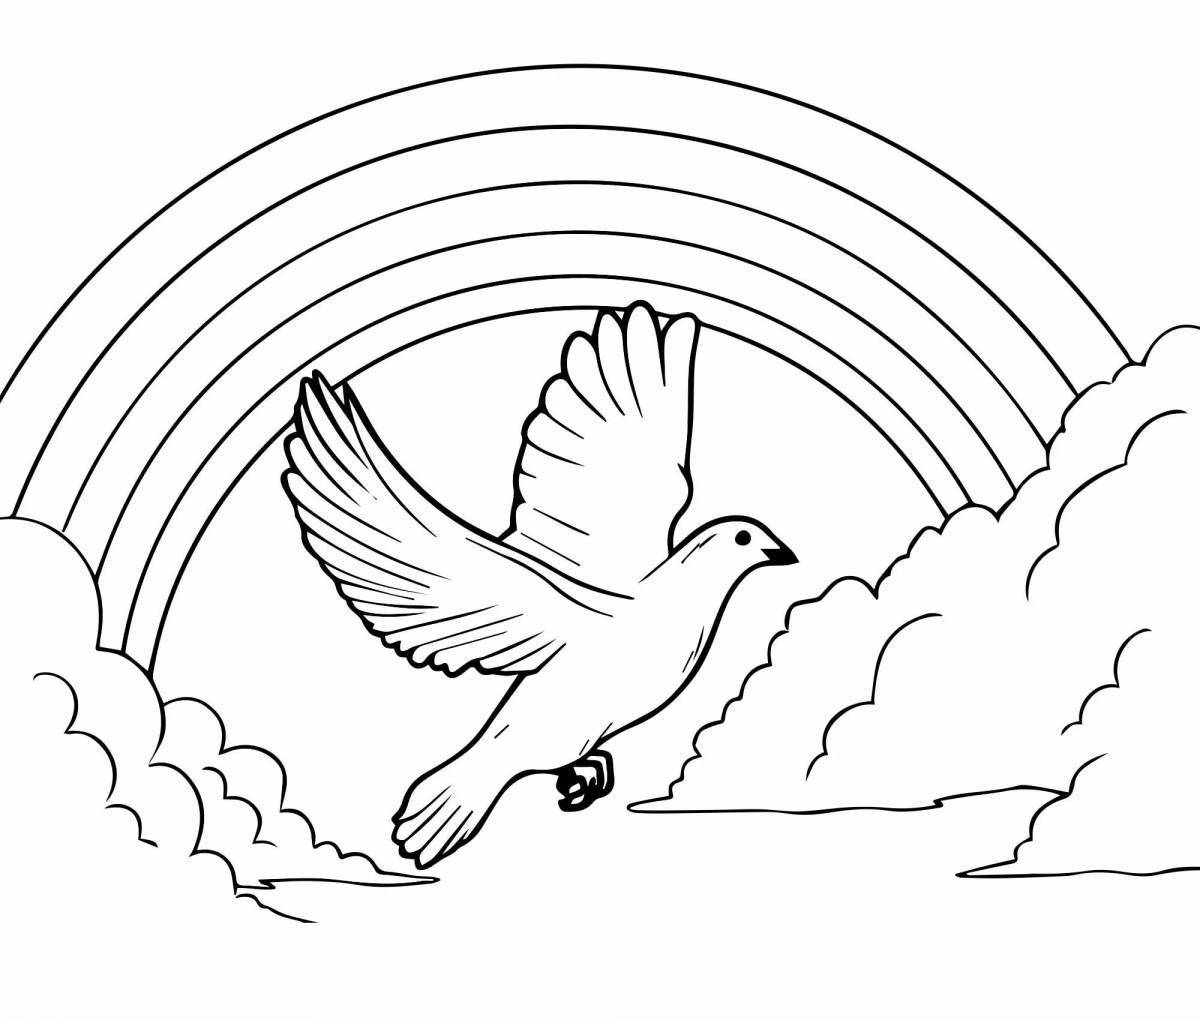 Coloring page comforting peace on earth